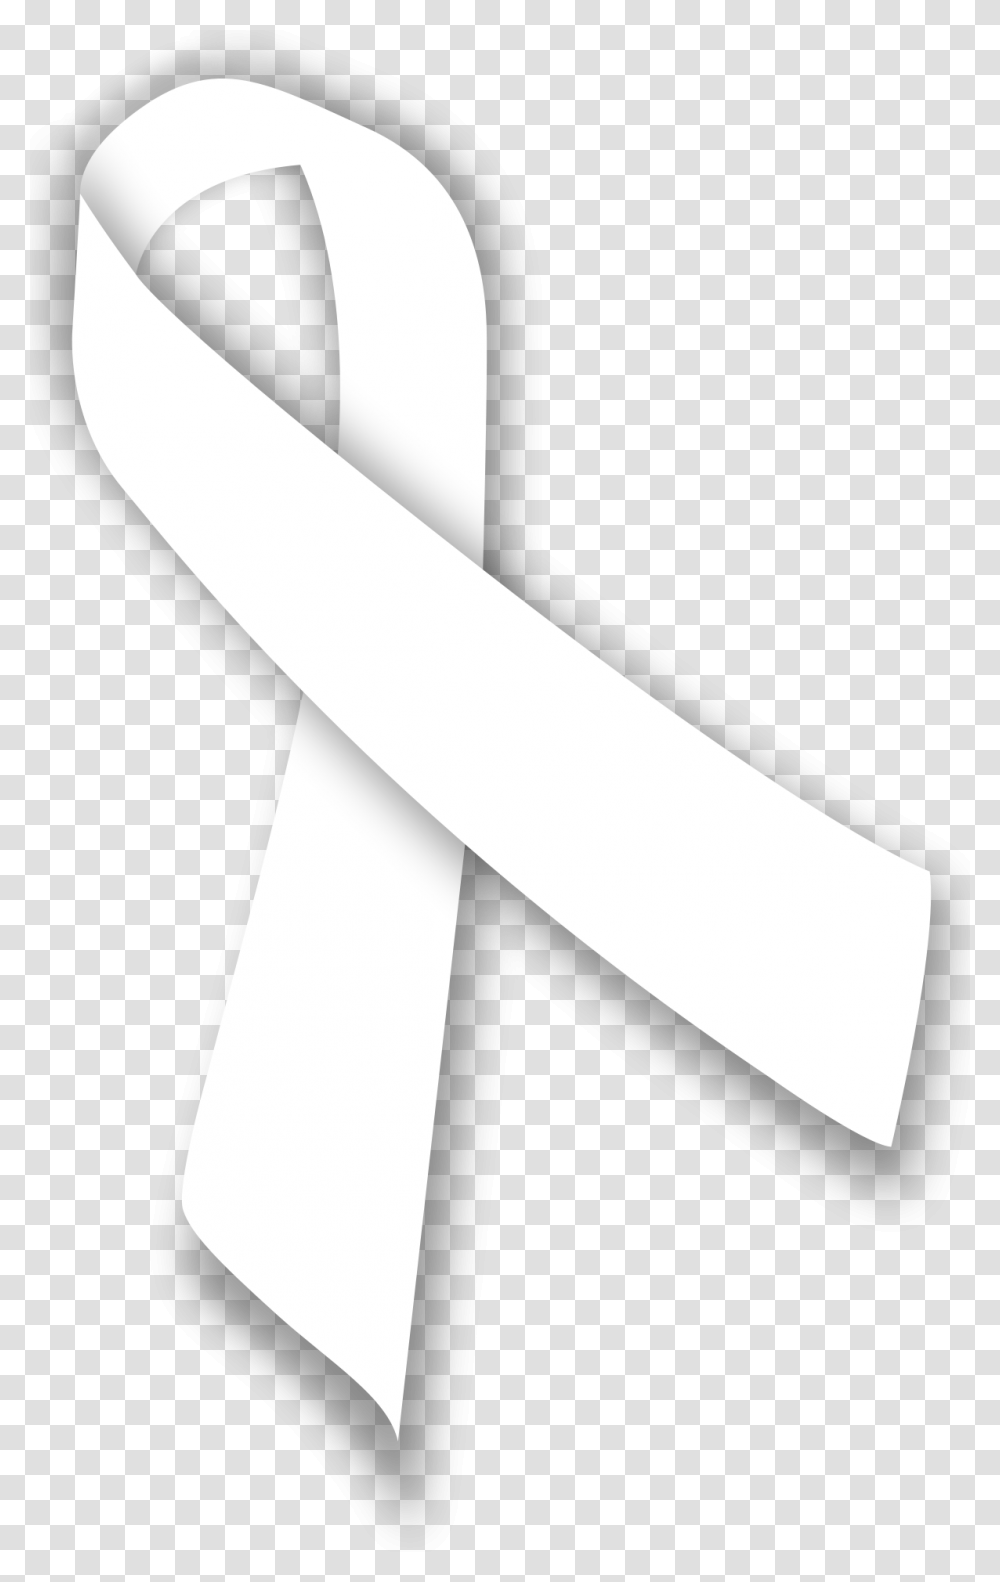 Lung Cancer Ribbon, Weapon, Weaponry, Sword, Blade Transparent Png